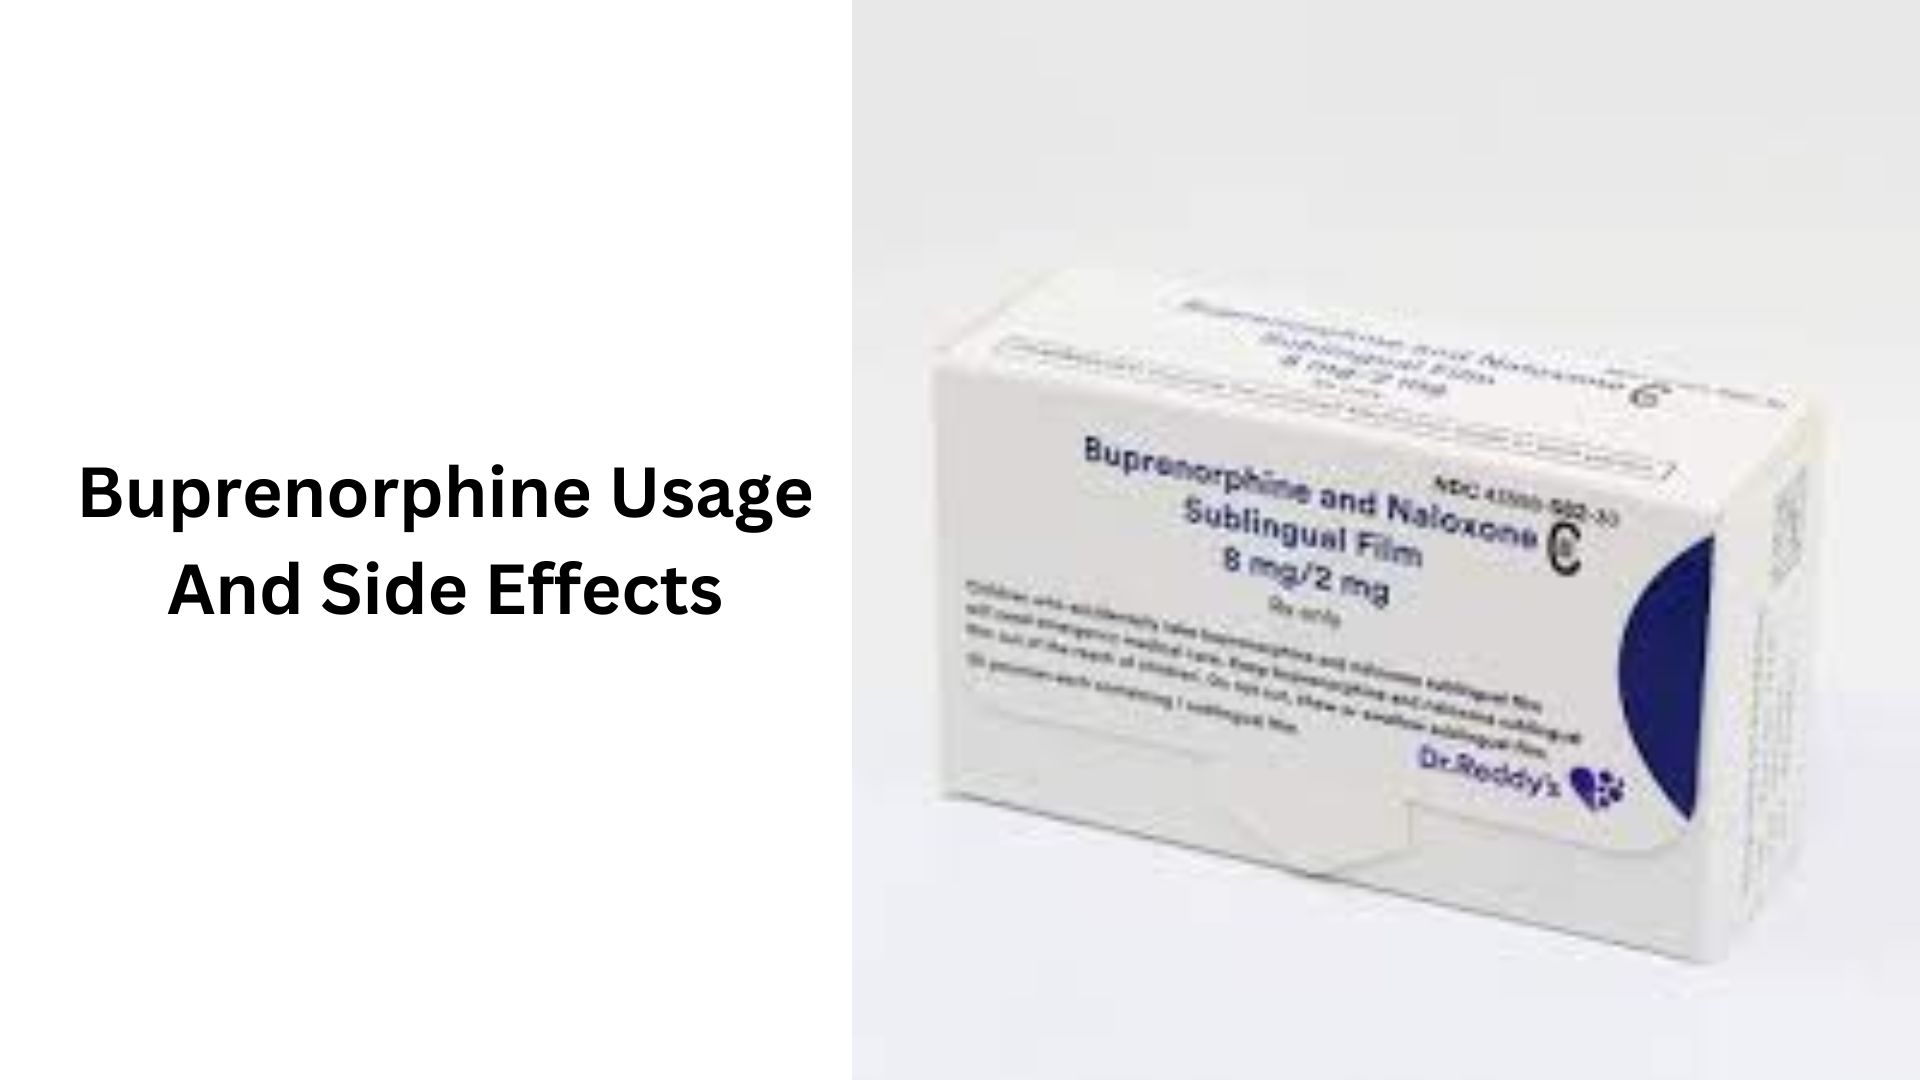 Buprenorphine Usage And Side Effects